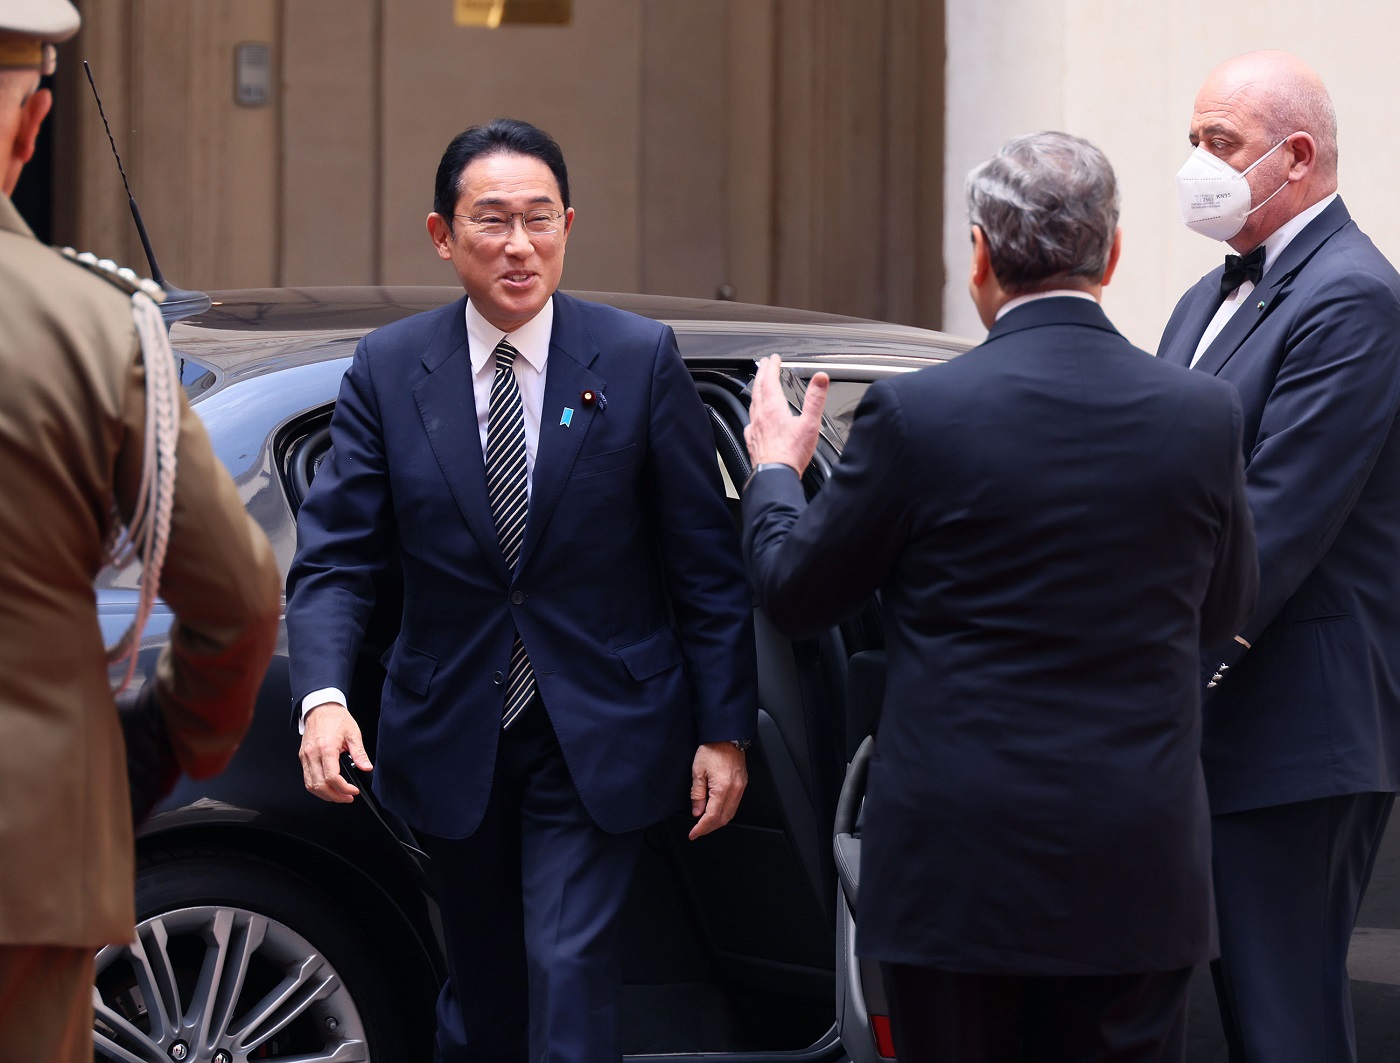 Photograph of the Prime Minister being welcomed by Prime Minister Draghi (1)